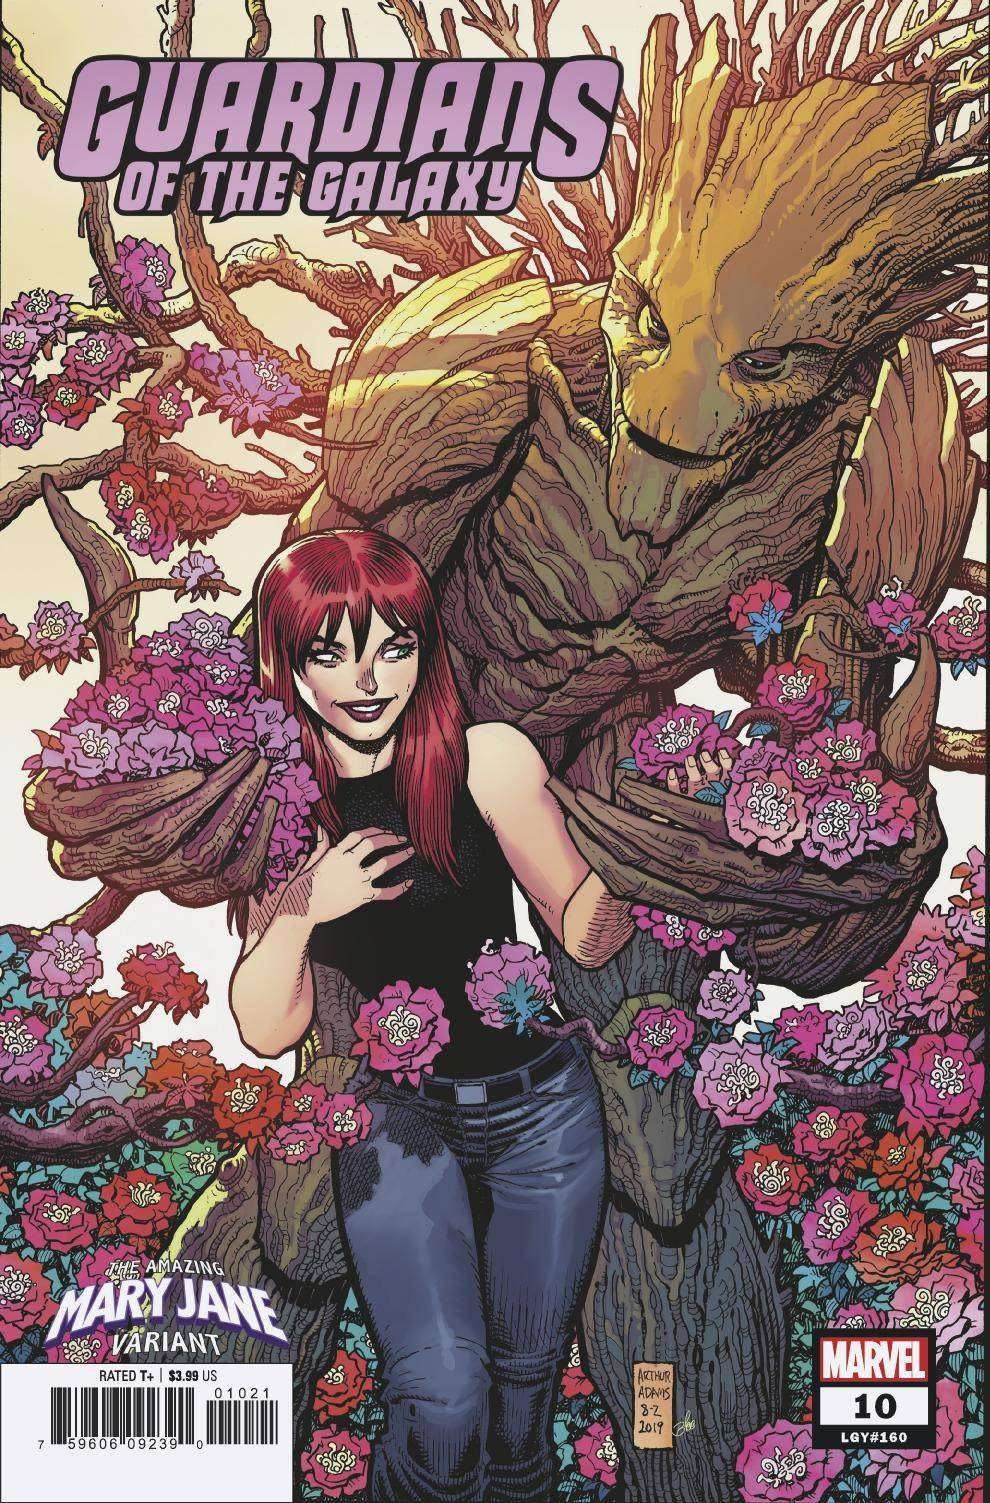 GUARDIANS OF THE GALAXY #10 ADAMS MARY JANE VARIANT